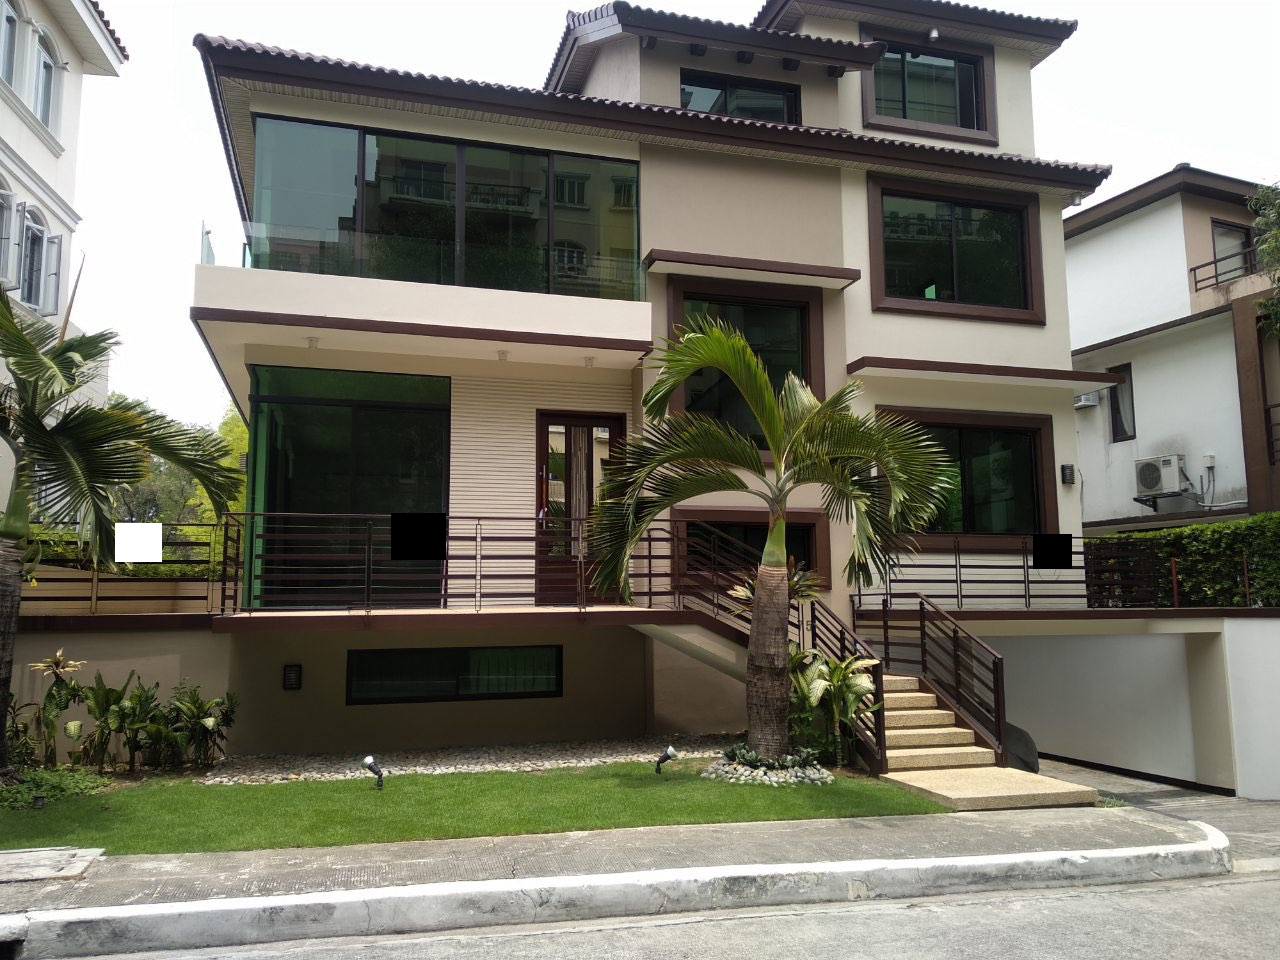 5 Bedrooms House For Rent, McKinley Hill Village Front View